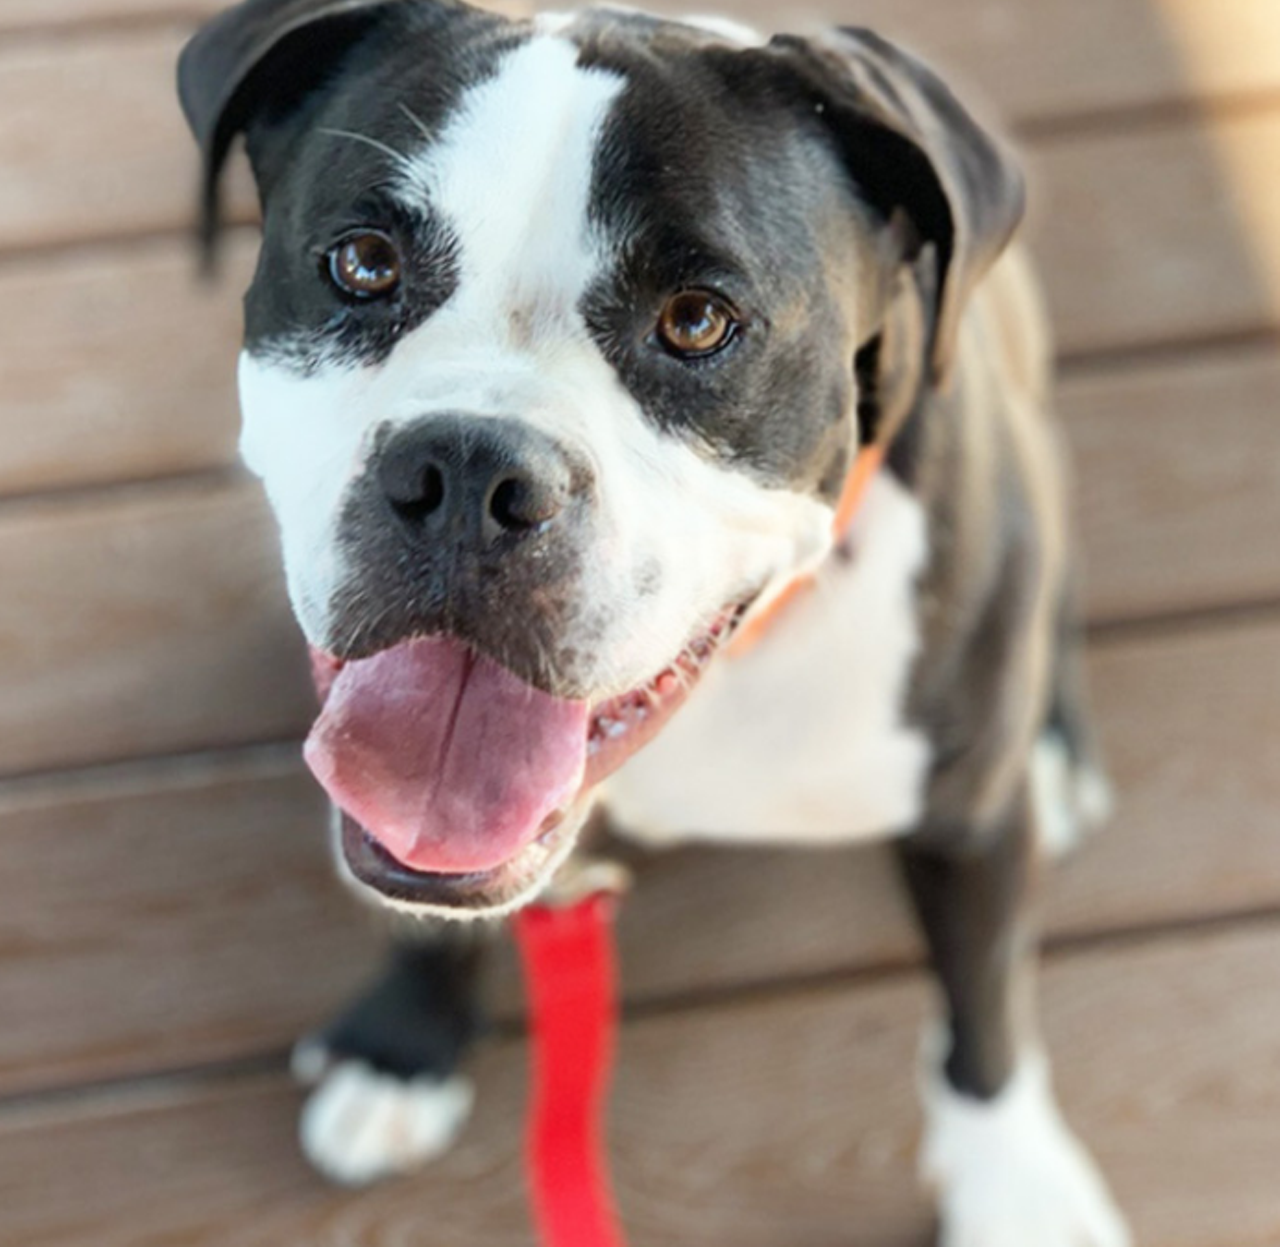 Obie
"Hi, I’m Obie! I’m a playful and friendly boy who’s looking for the perfect active human friend for me! Can’t you just imagine me as your fun furry sidekick? If so, don’t wait too long, come meet me today!"